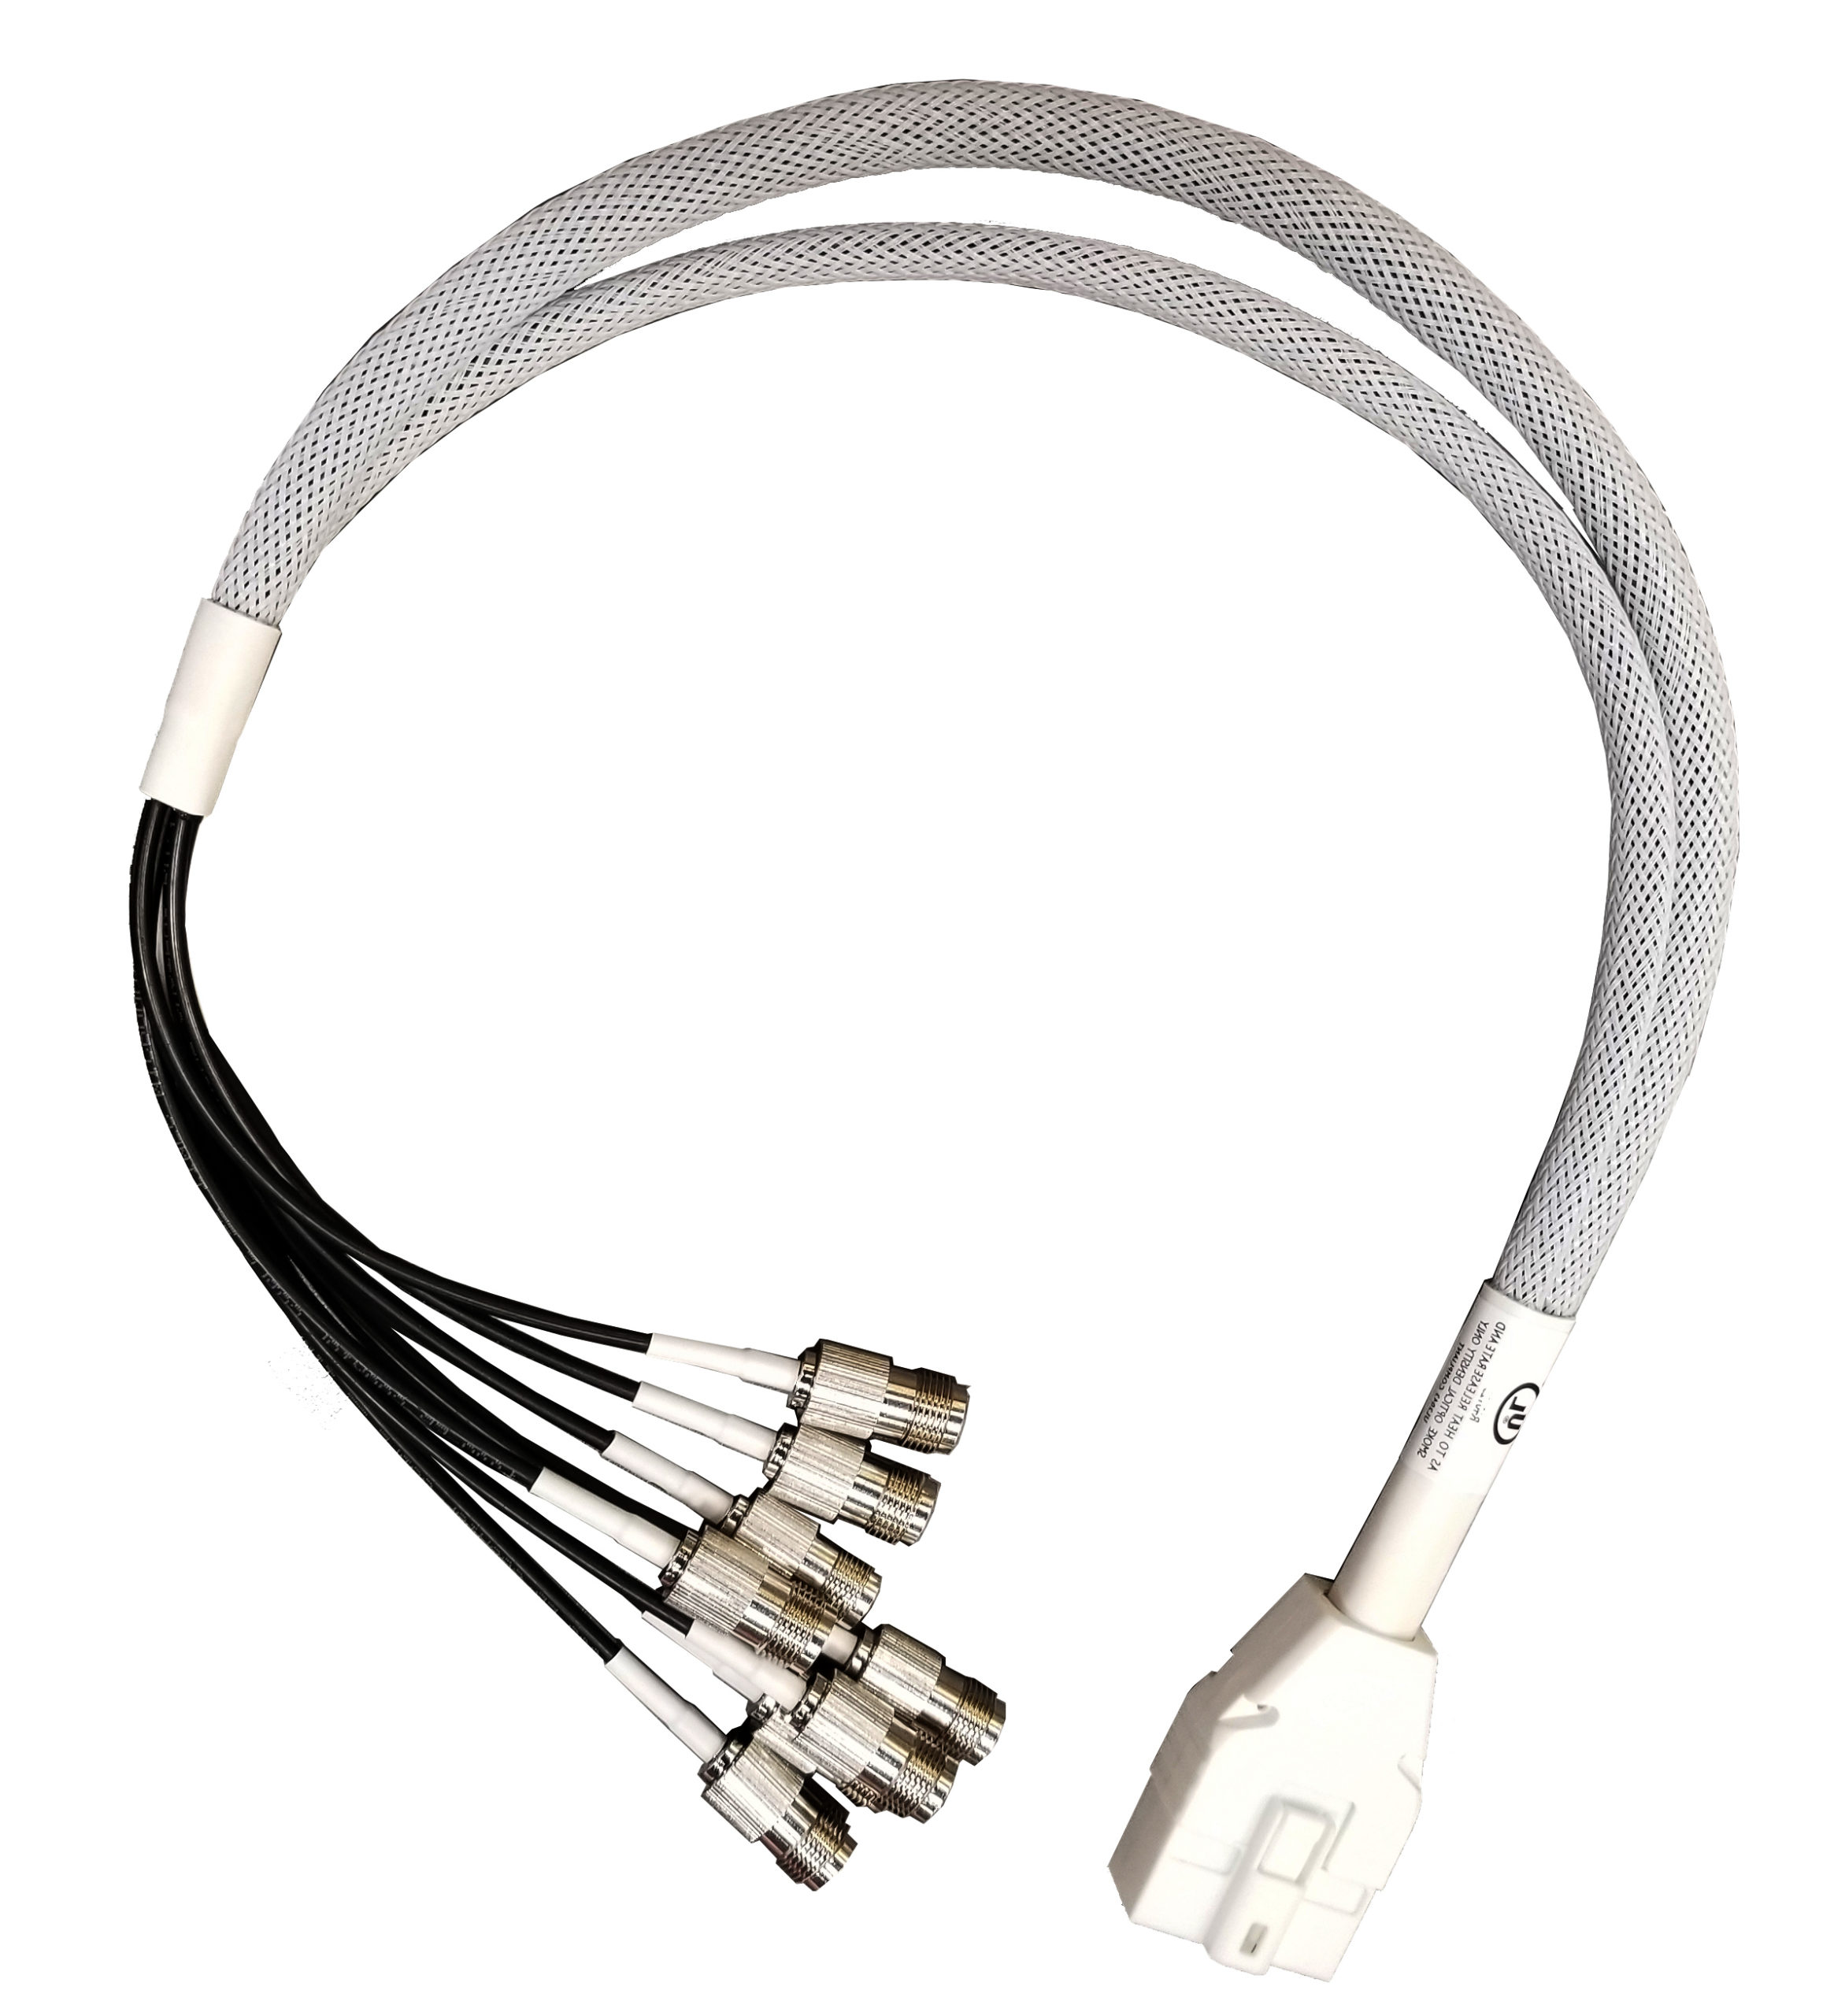 3 100 Series Cable with 8 Port N - DART Connectors - Ventev